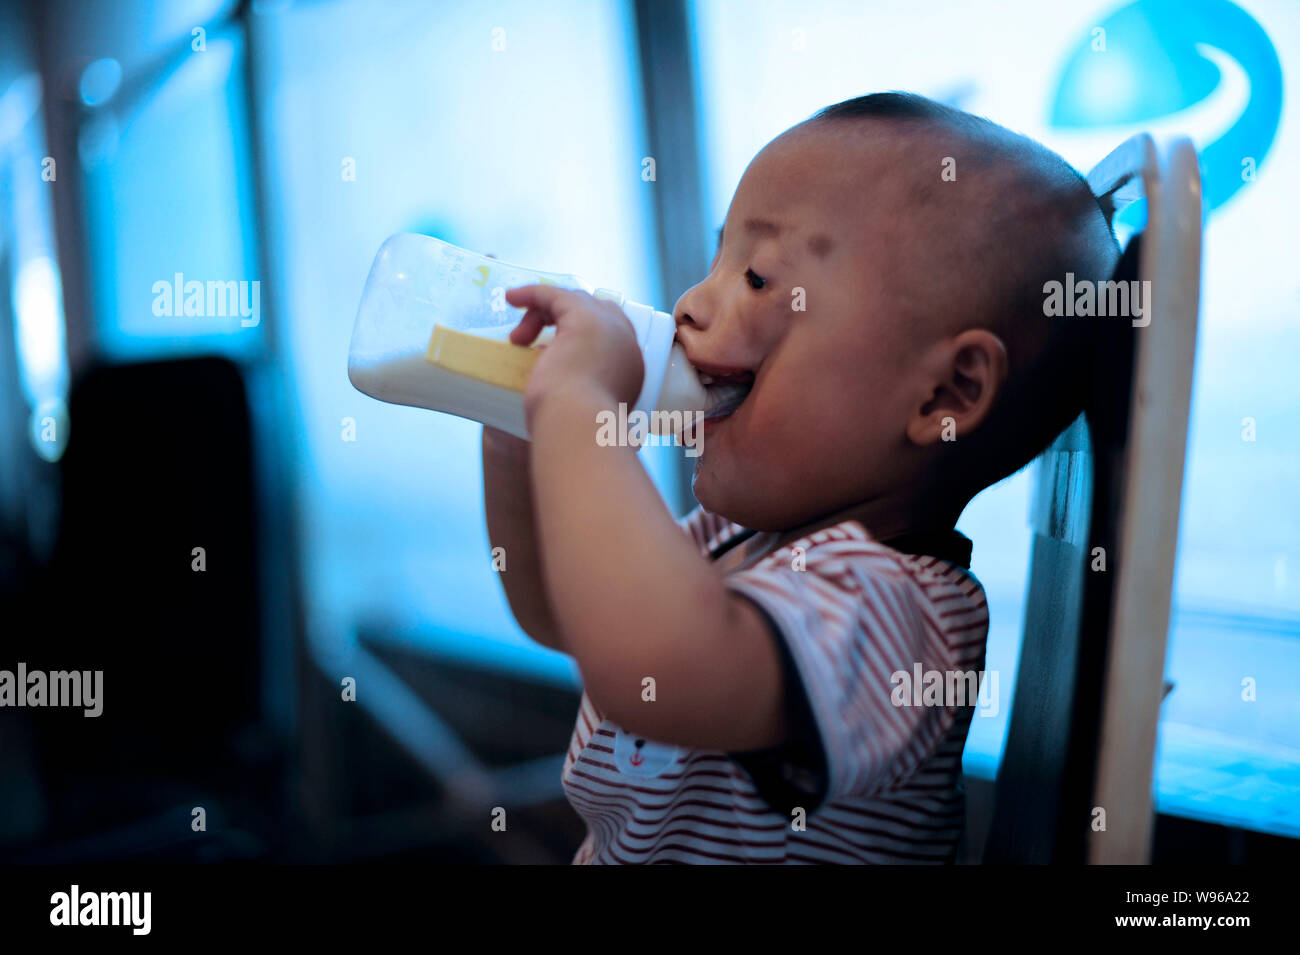 Junjun, who was born with a congenital facial cleft palate, is seen drinking milk at a hospital in Chongqing, China, 30 July 2012.   Junjun is a 1-yea Stock Photo